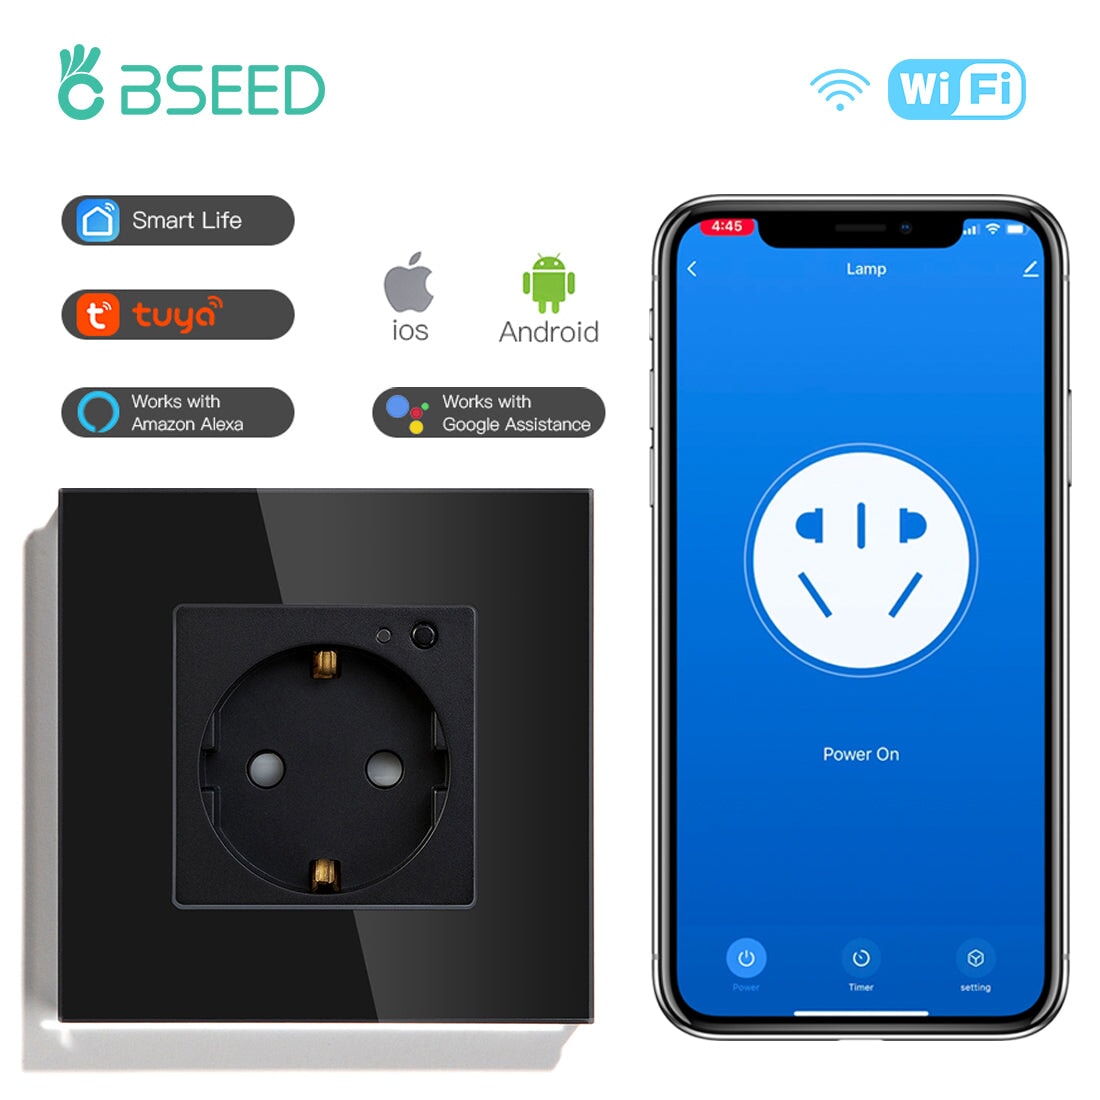 BSEED Wifi EU Wall Sockets Single Power Outlets Kids Protection Wall Plates & Covers Bseedswitch black Signle 